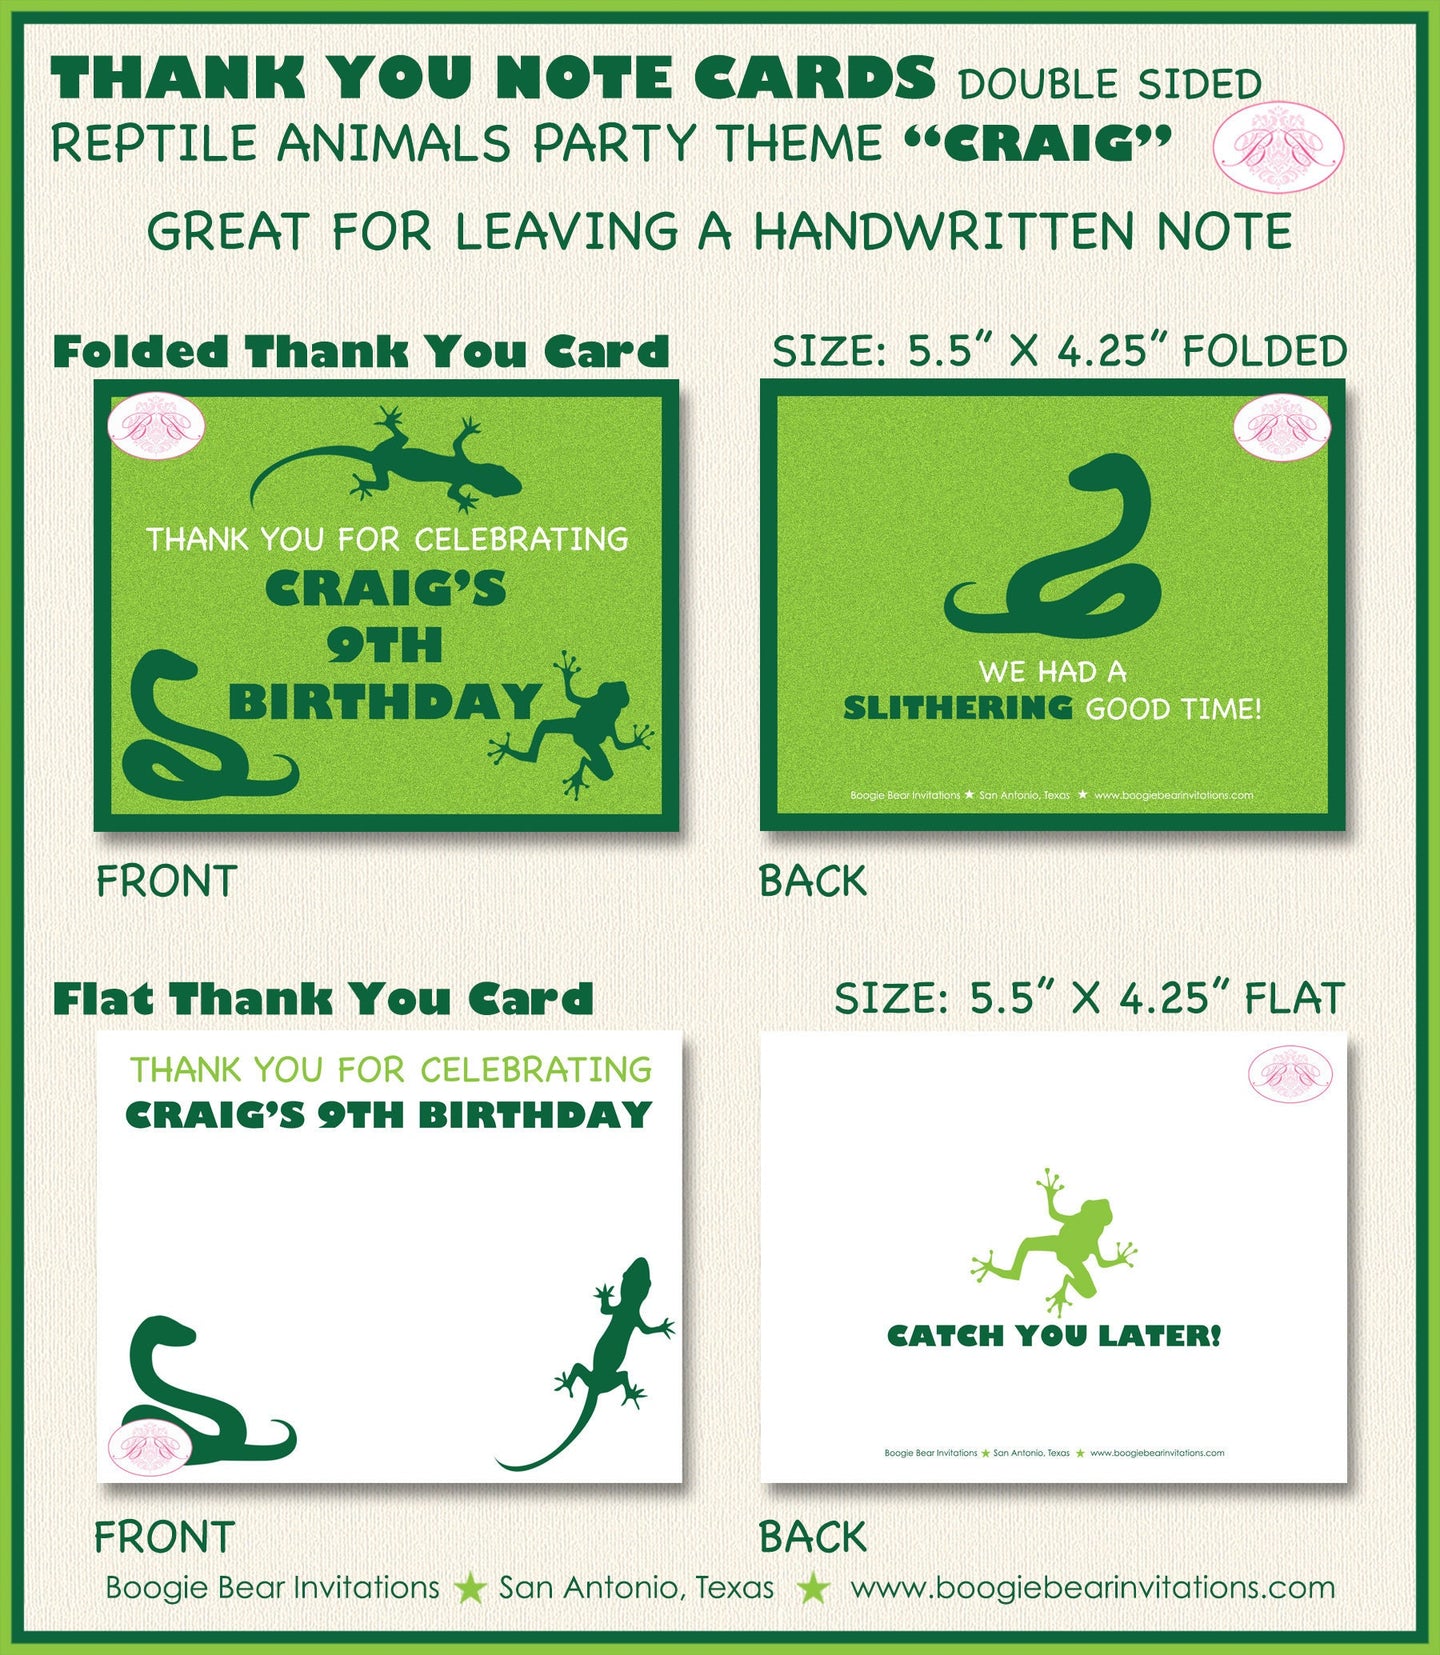 Reptile Birthday Party Thank You Card Note Snake Frog Toad Amazon Jungle Wild Rain Forest Green Boogie Bear Invitations Craig Theme Printed